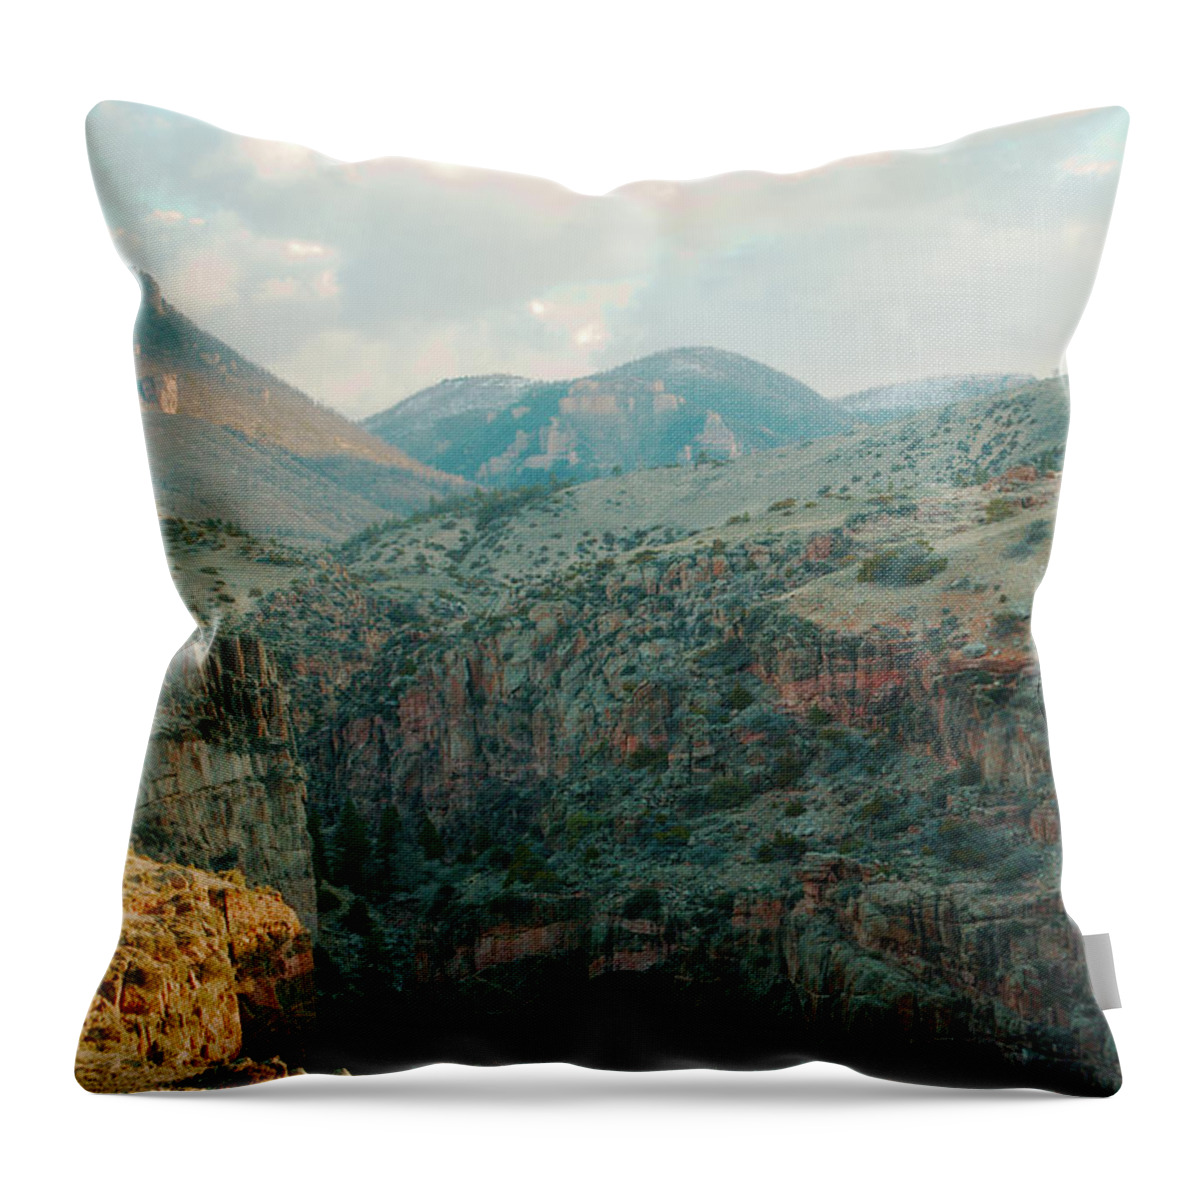 Bighorn Throw Pillow featuring the photograph Bighorn National Forest by Troy Stapek